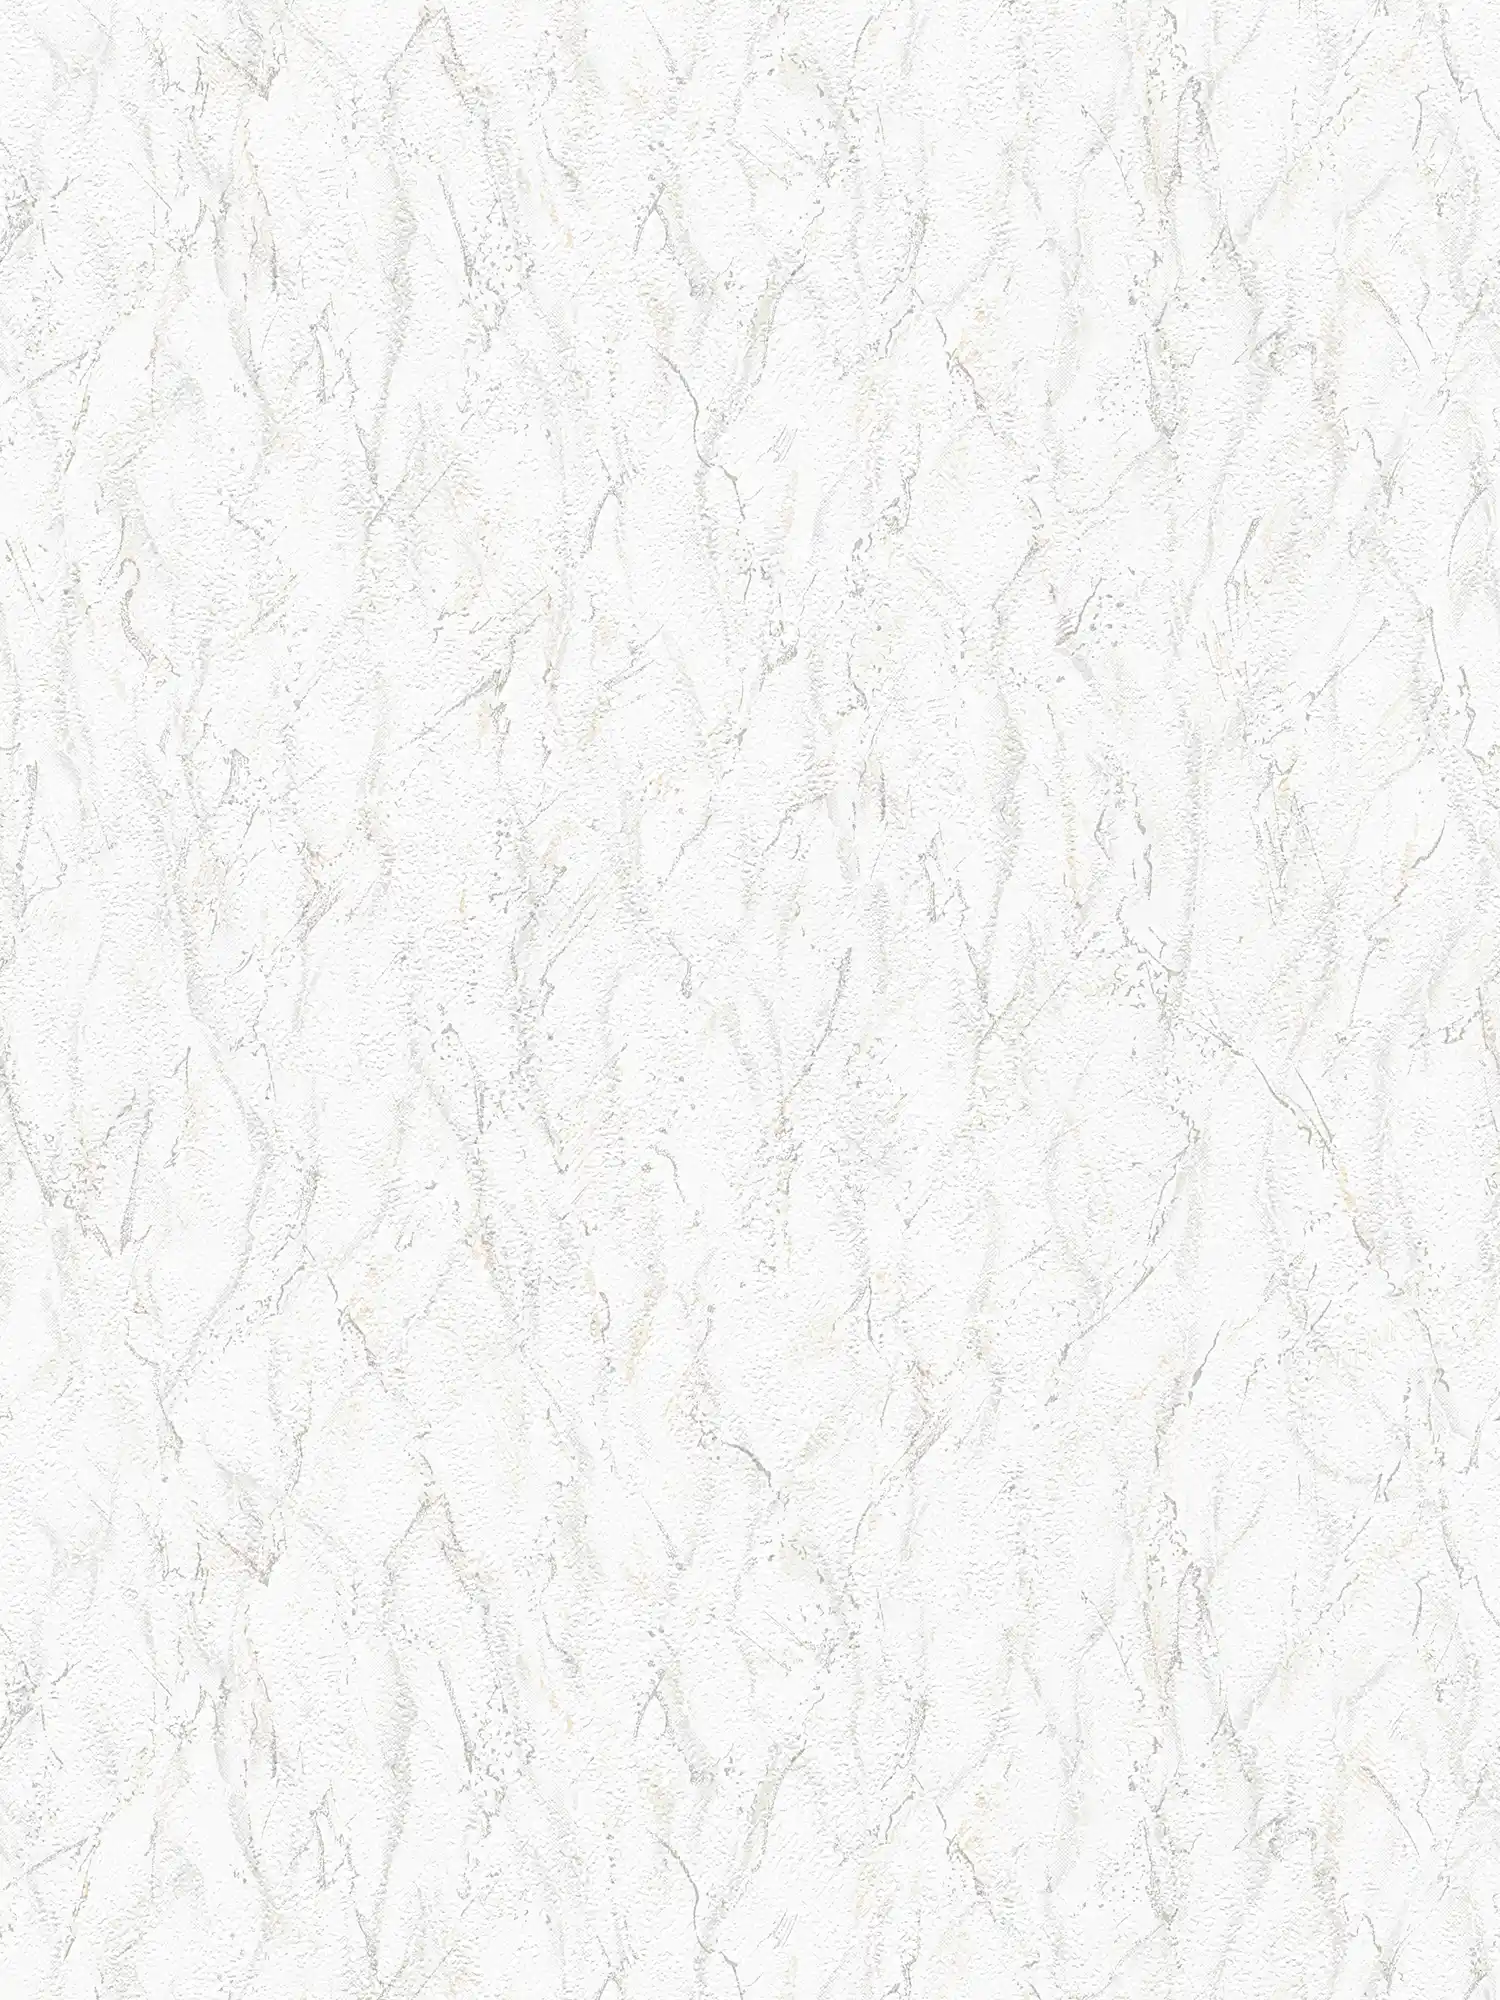 Textured wallpaper with embossed pattern & marble effect - grey, white
